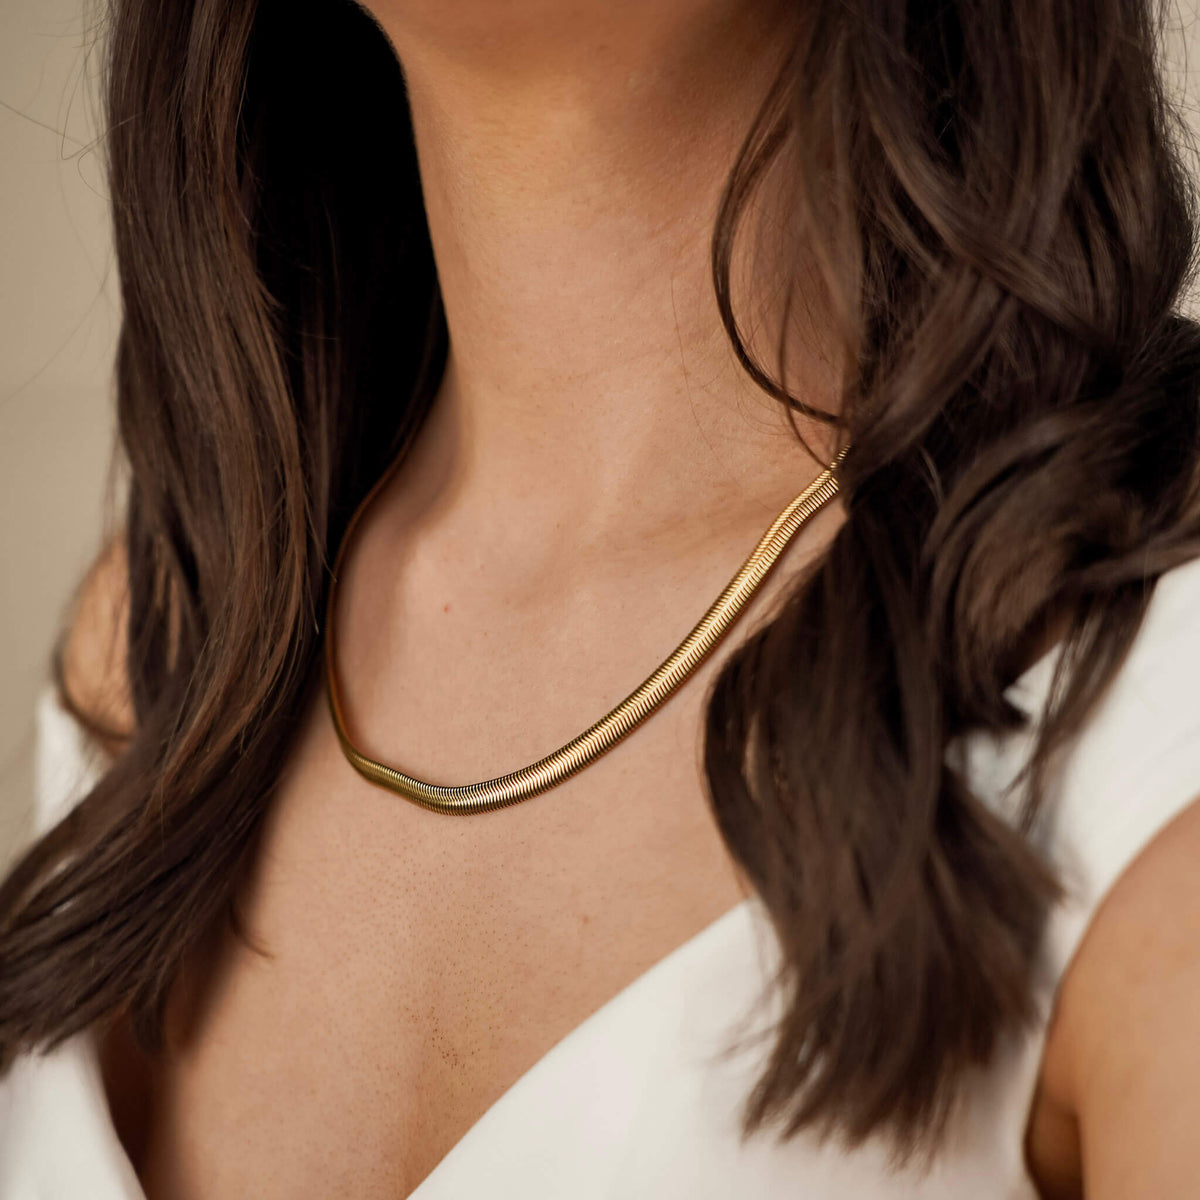 Elegant textured gold necklace worn by a brunette woman. The necklace is elegant and minimalistic making it timeless. 